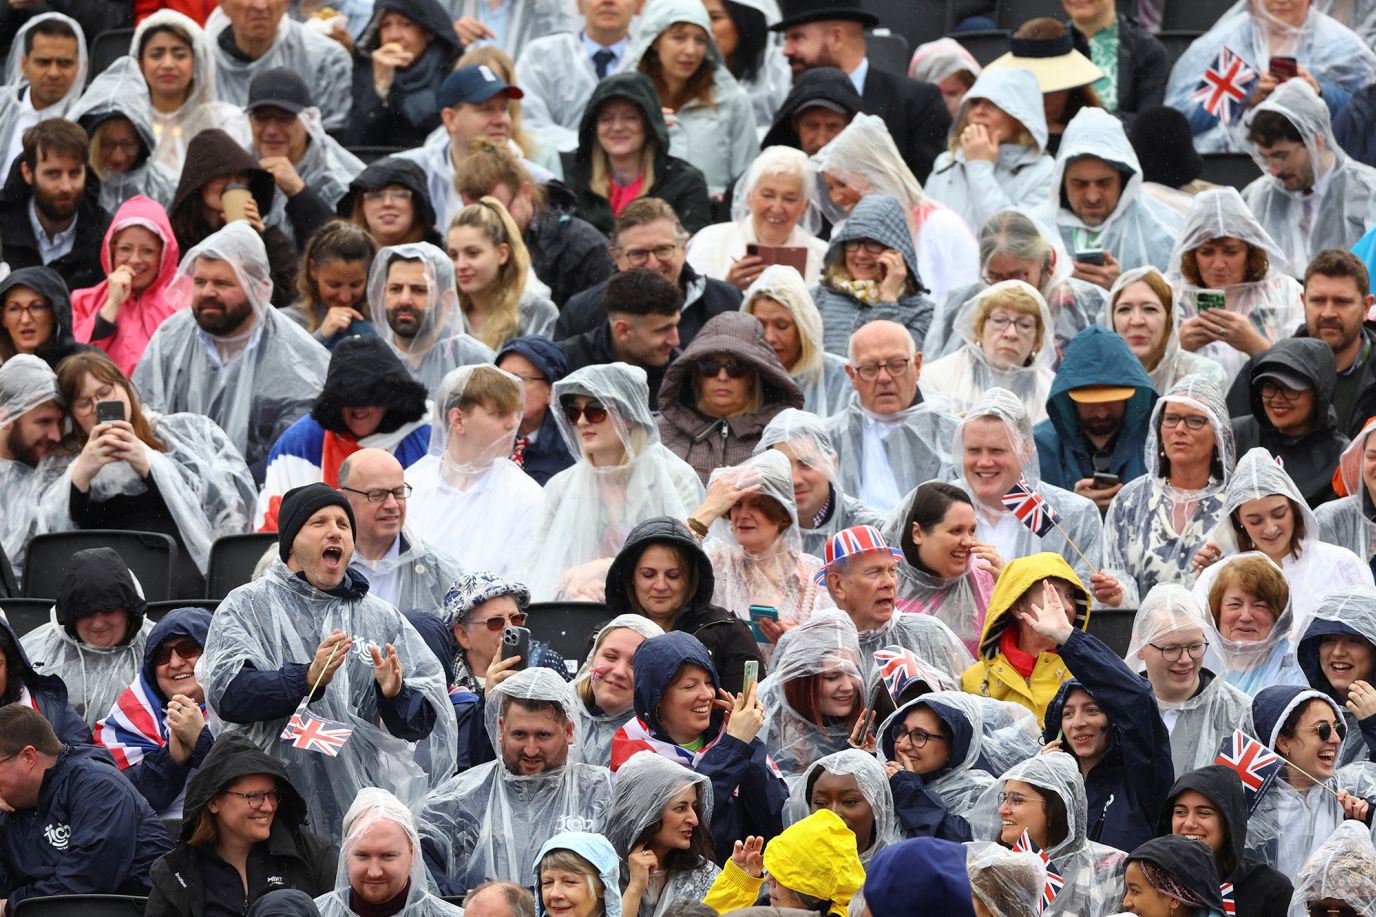 People gather to watch the procession. Showers moved through London on Friday and <a href='https://www.cnn.com/uk/live-news/king-charles-iii-coronation-ckc-intl-gbr/h_0cf74794c8e0be8ca222db150c2ccb94' target='_blank'>more rain was expected for Saturday</a>.